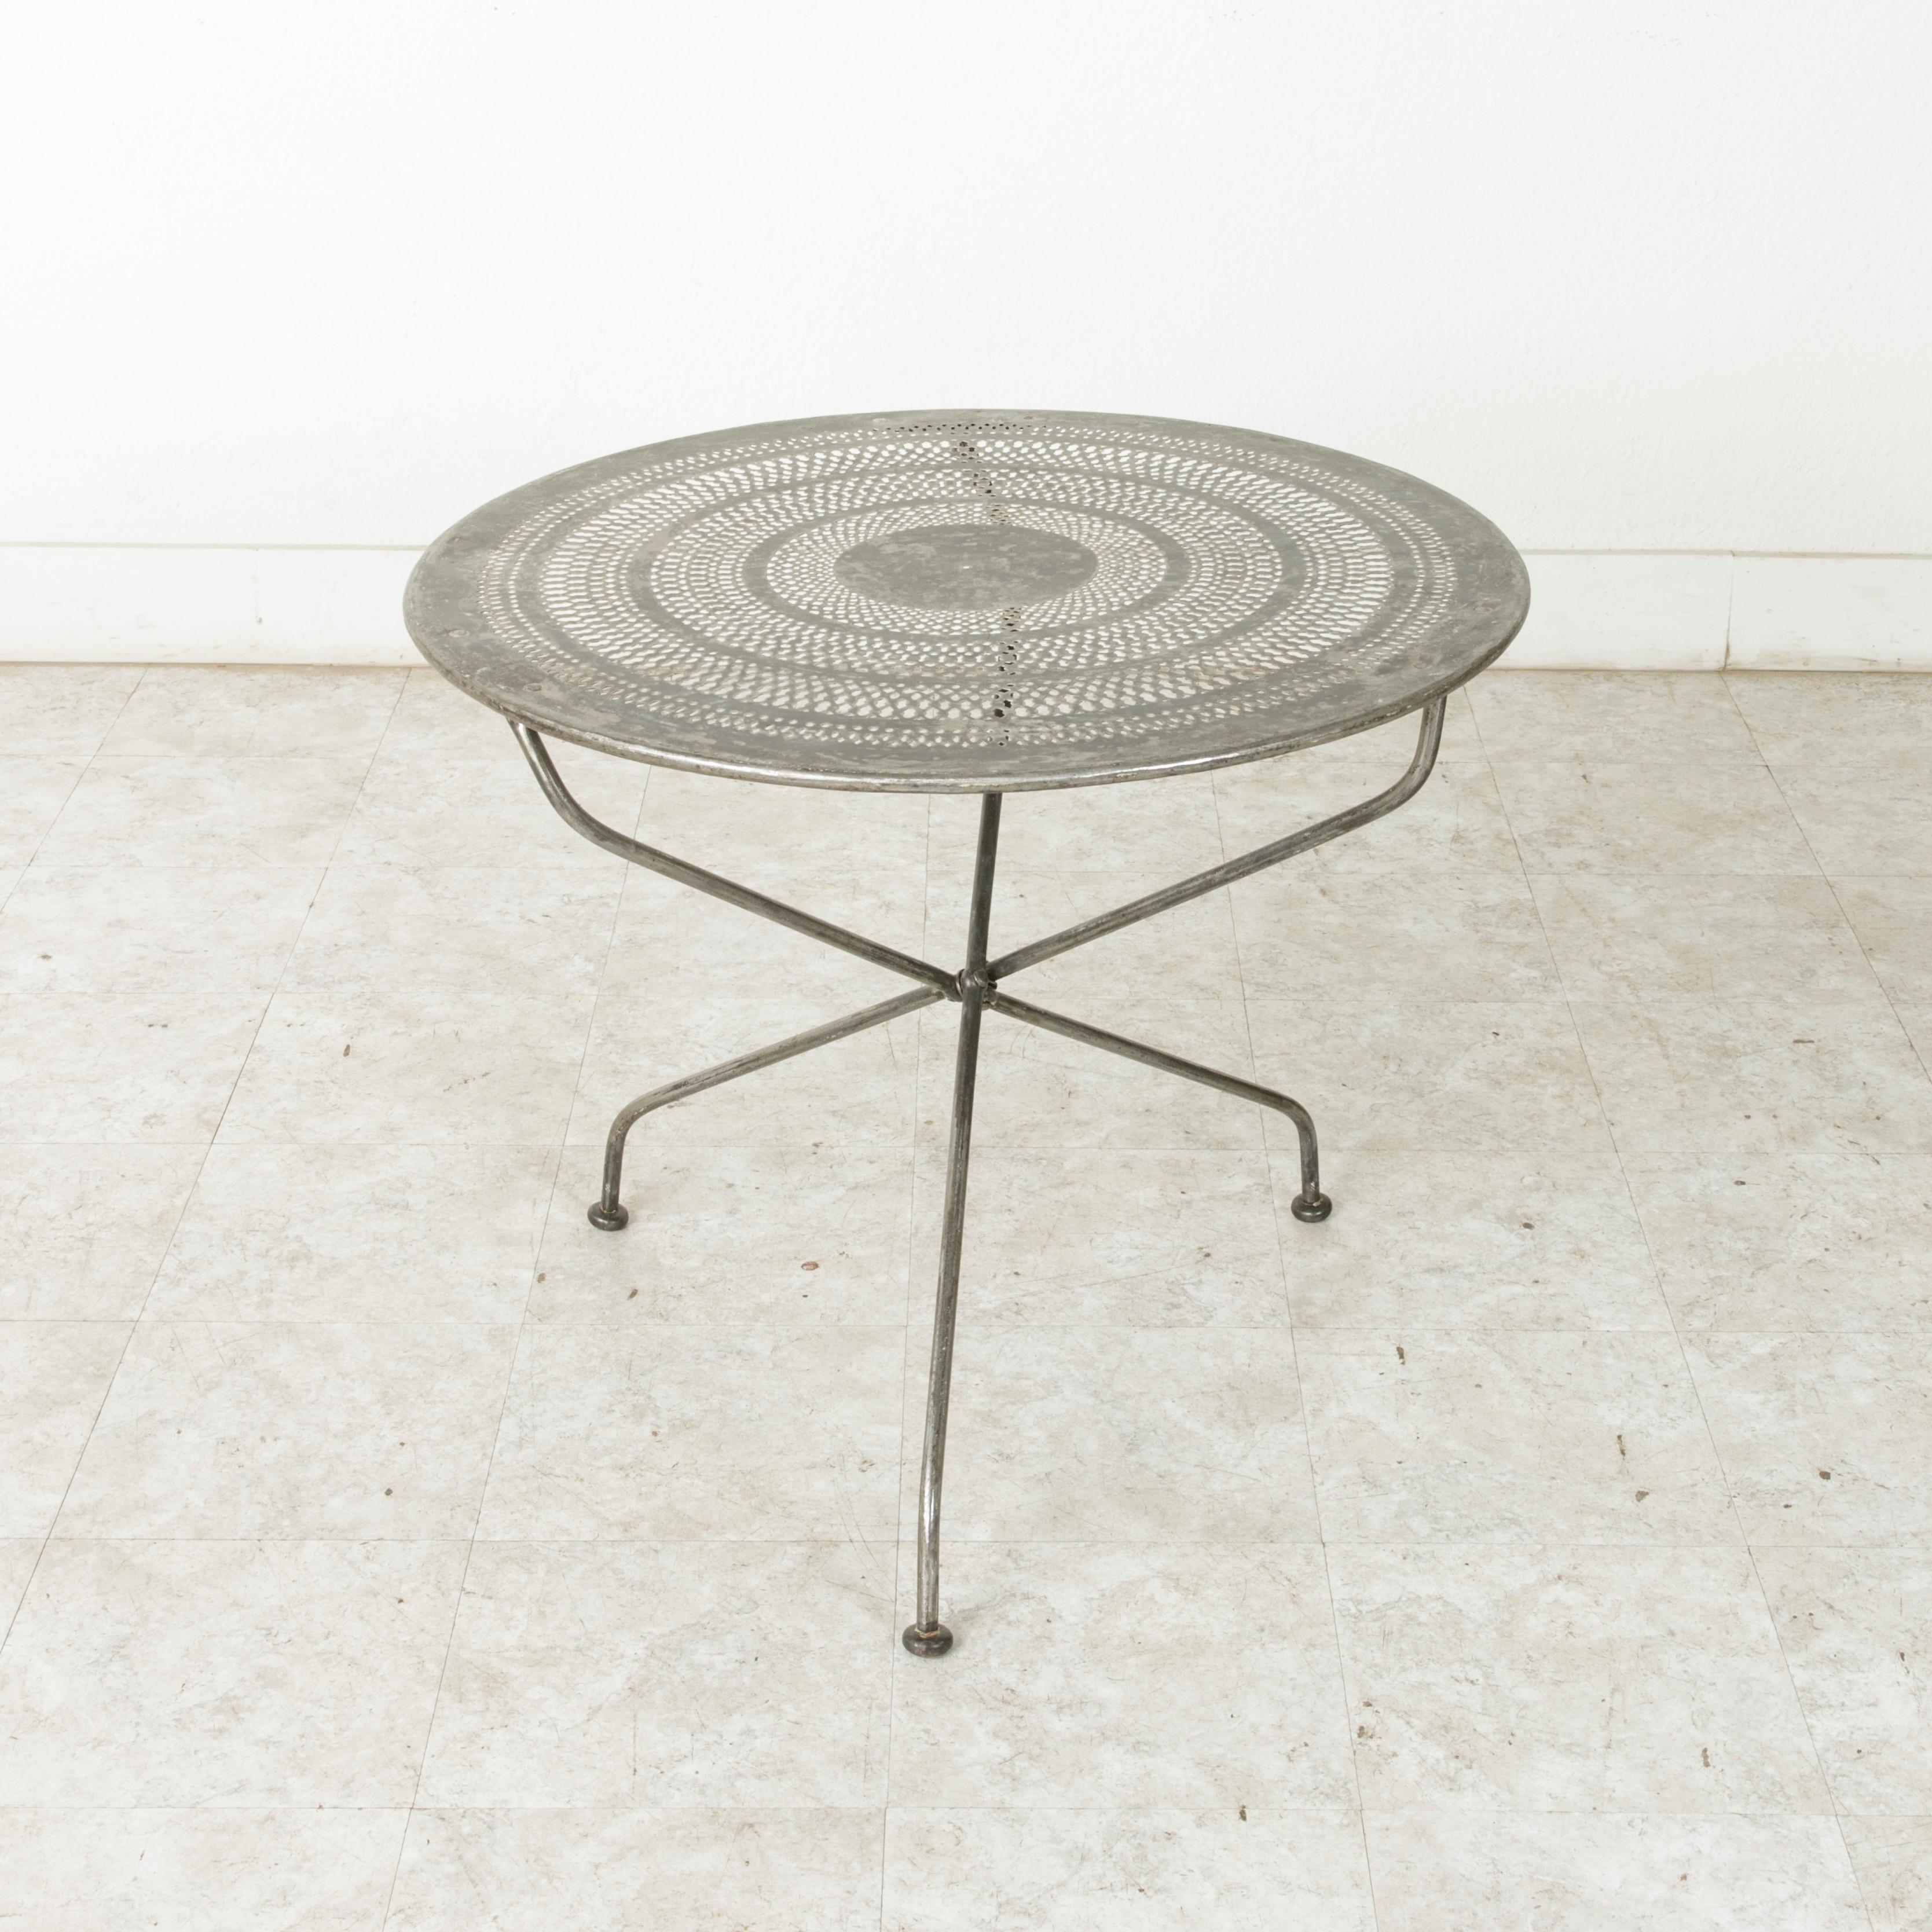 This French round outdoor garden table from the mid-twentieth century features a pierced metal top in a concentric circled pattern. The pierced top allows rainwater to pass through if the table is left outdoors. Resting on three legs that join in